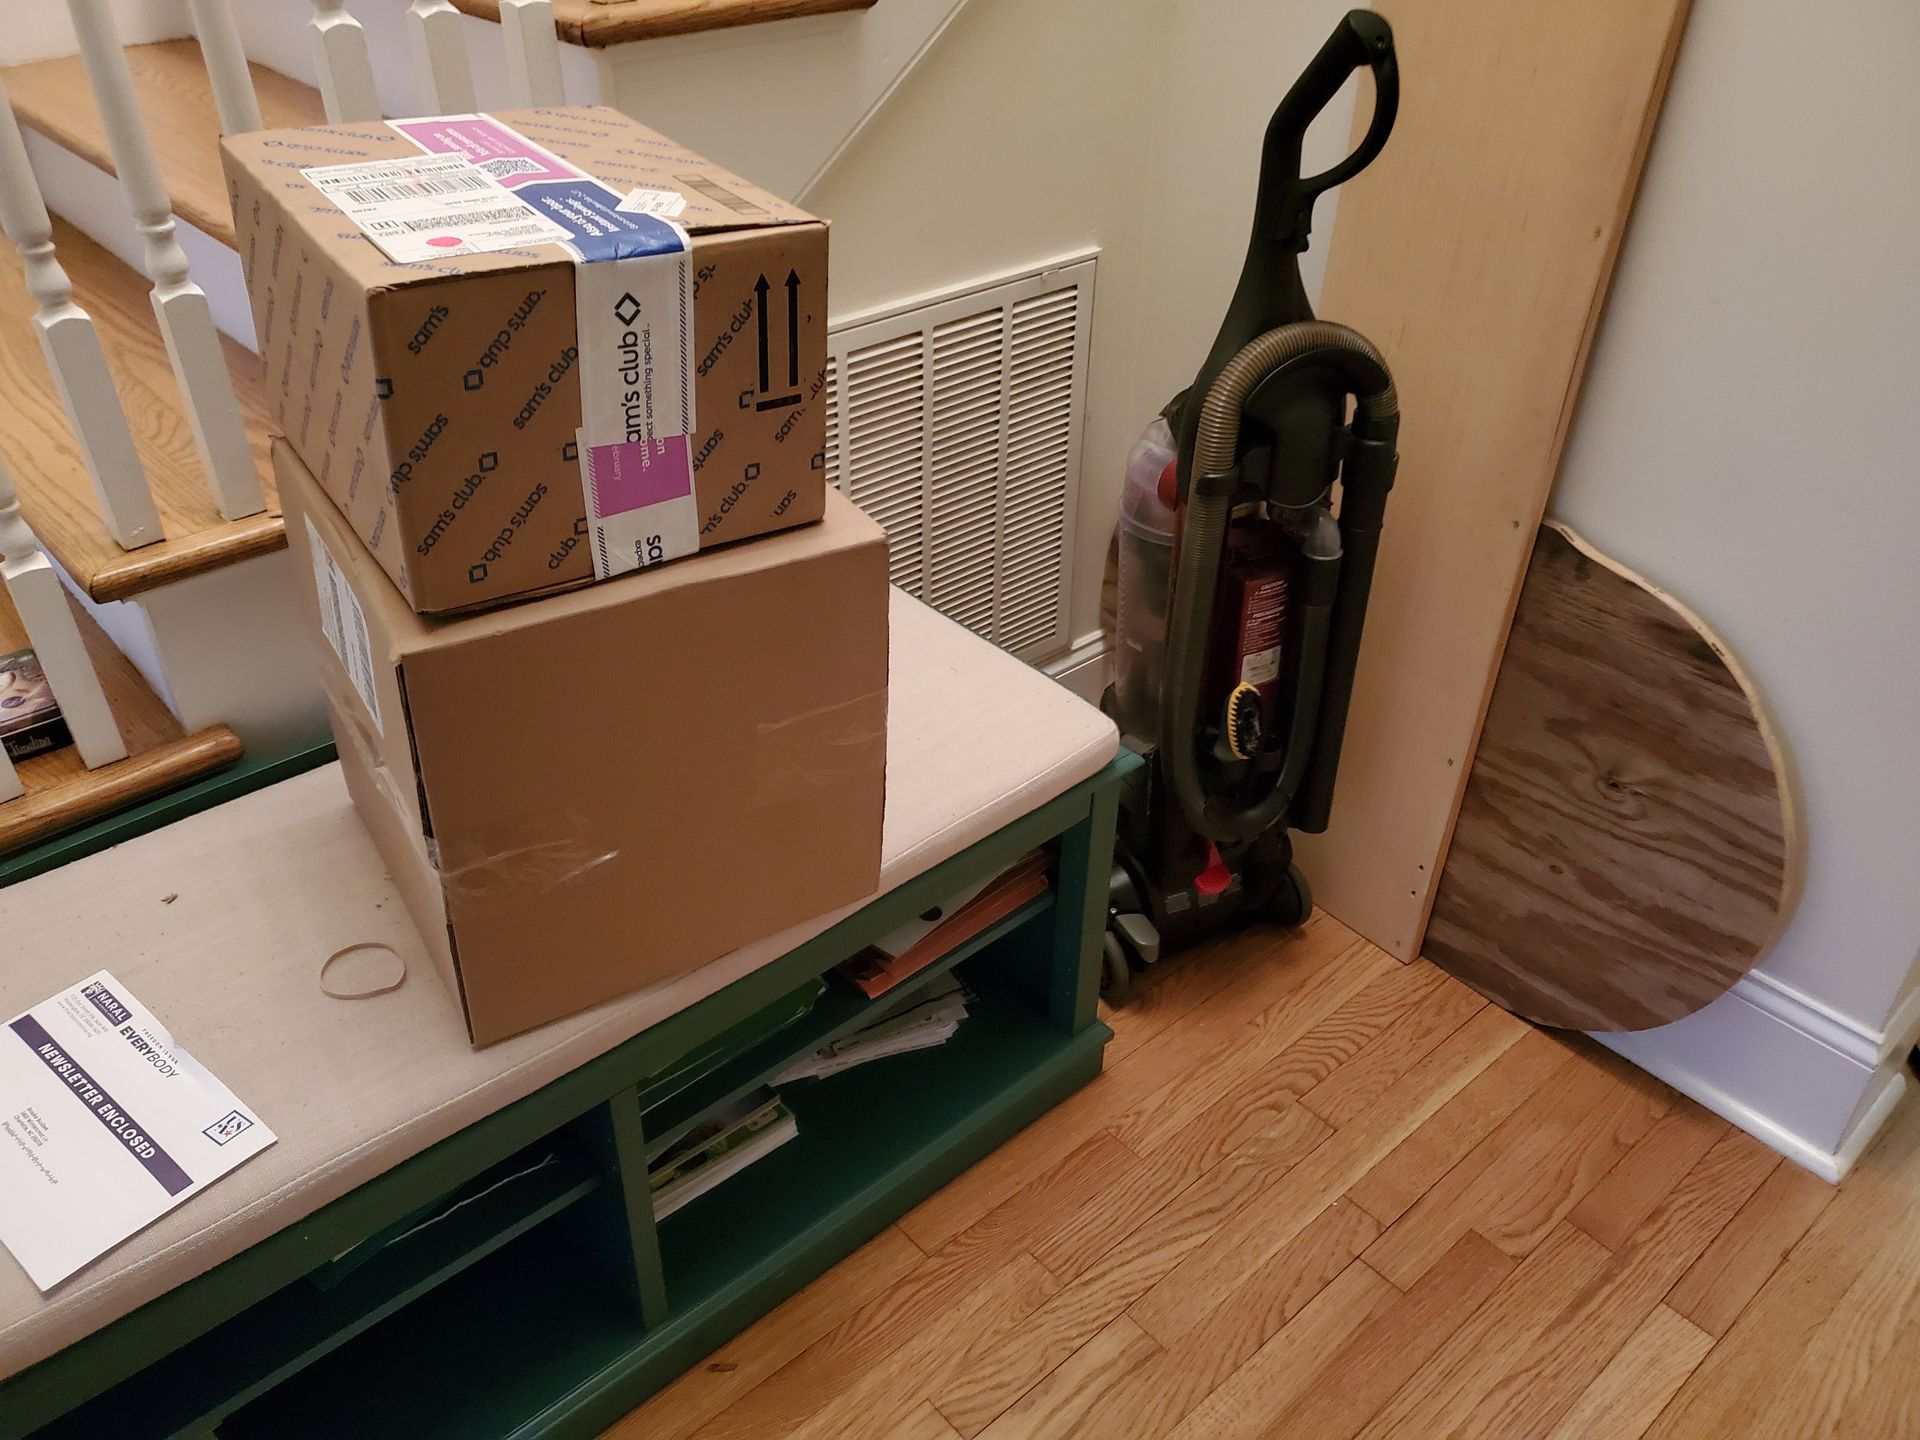 two boxes are stacked on top of each other on a bench next to a vacuum cleaner